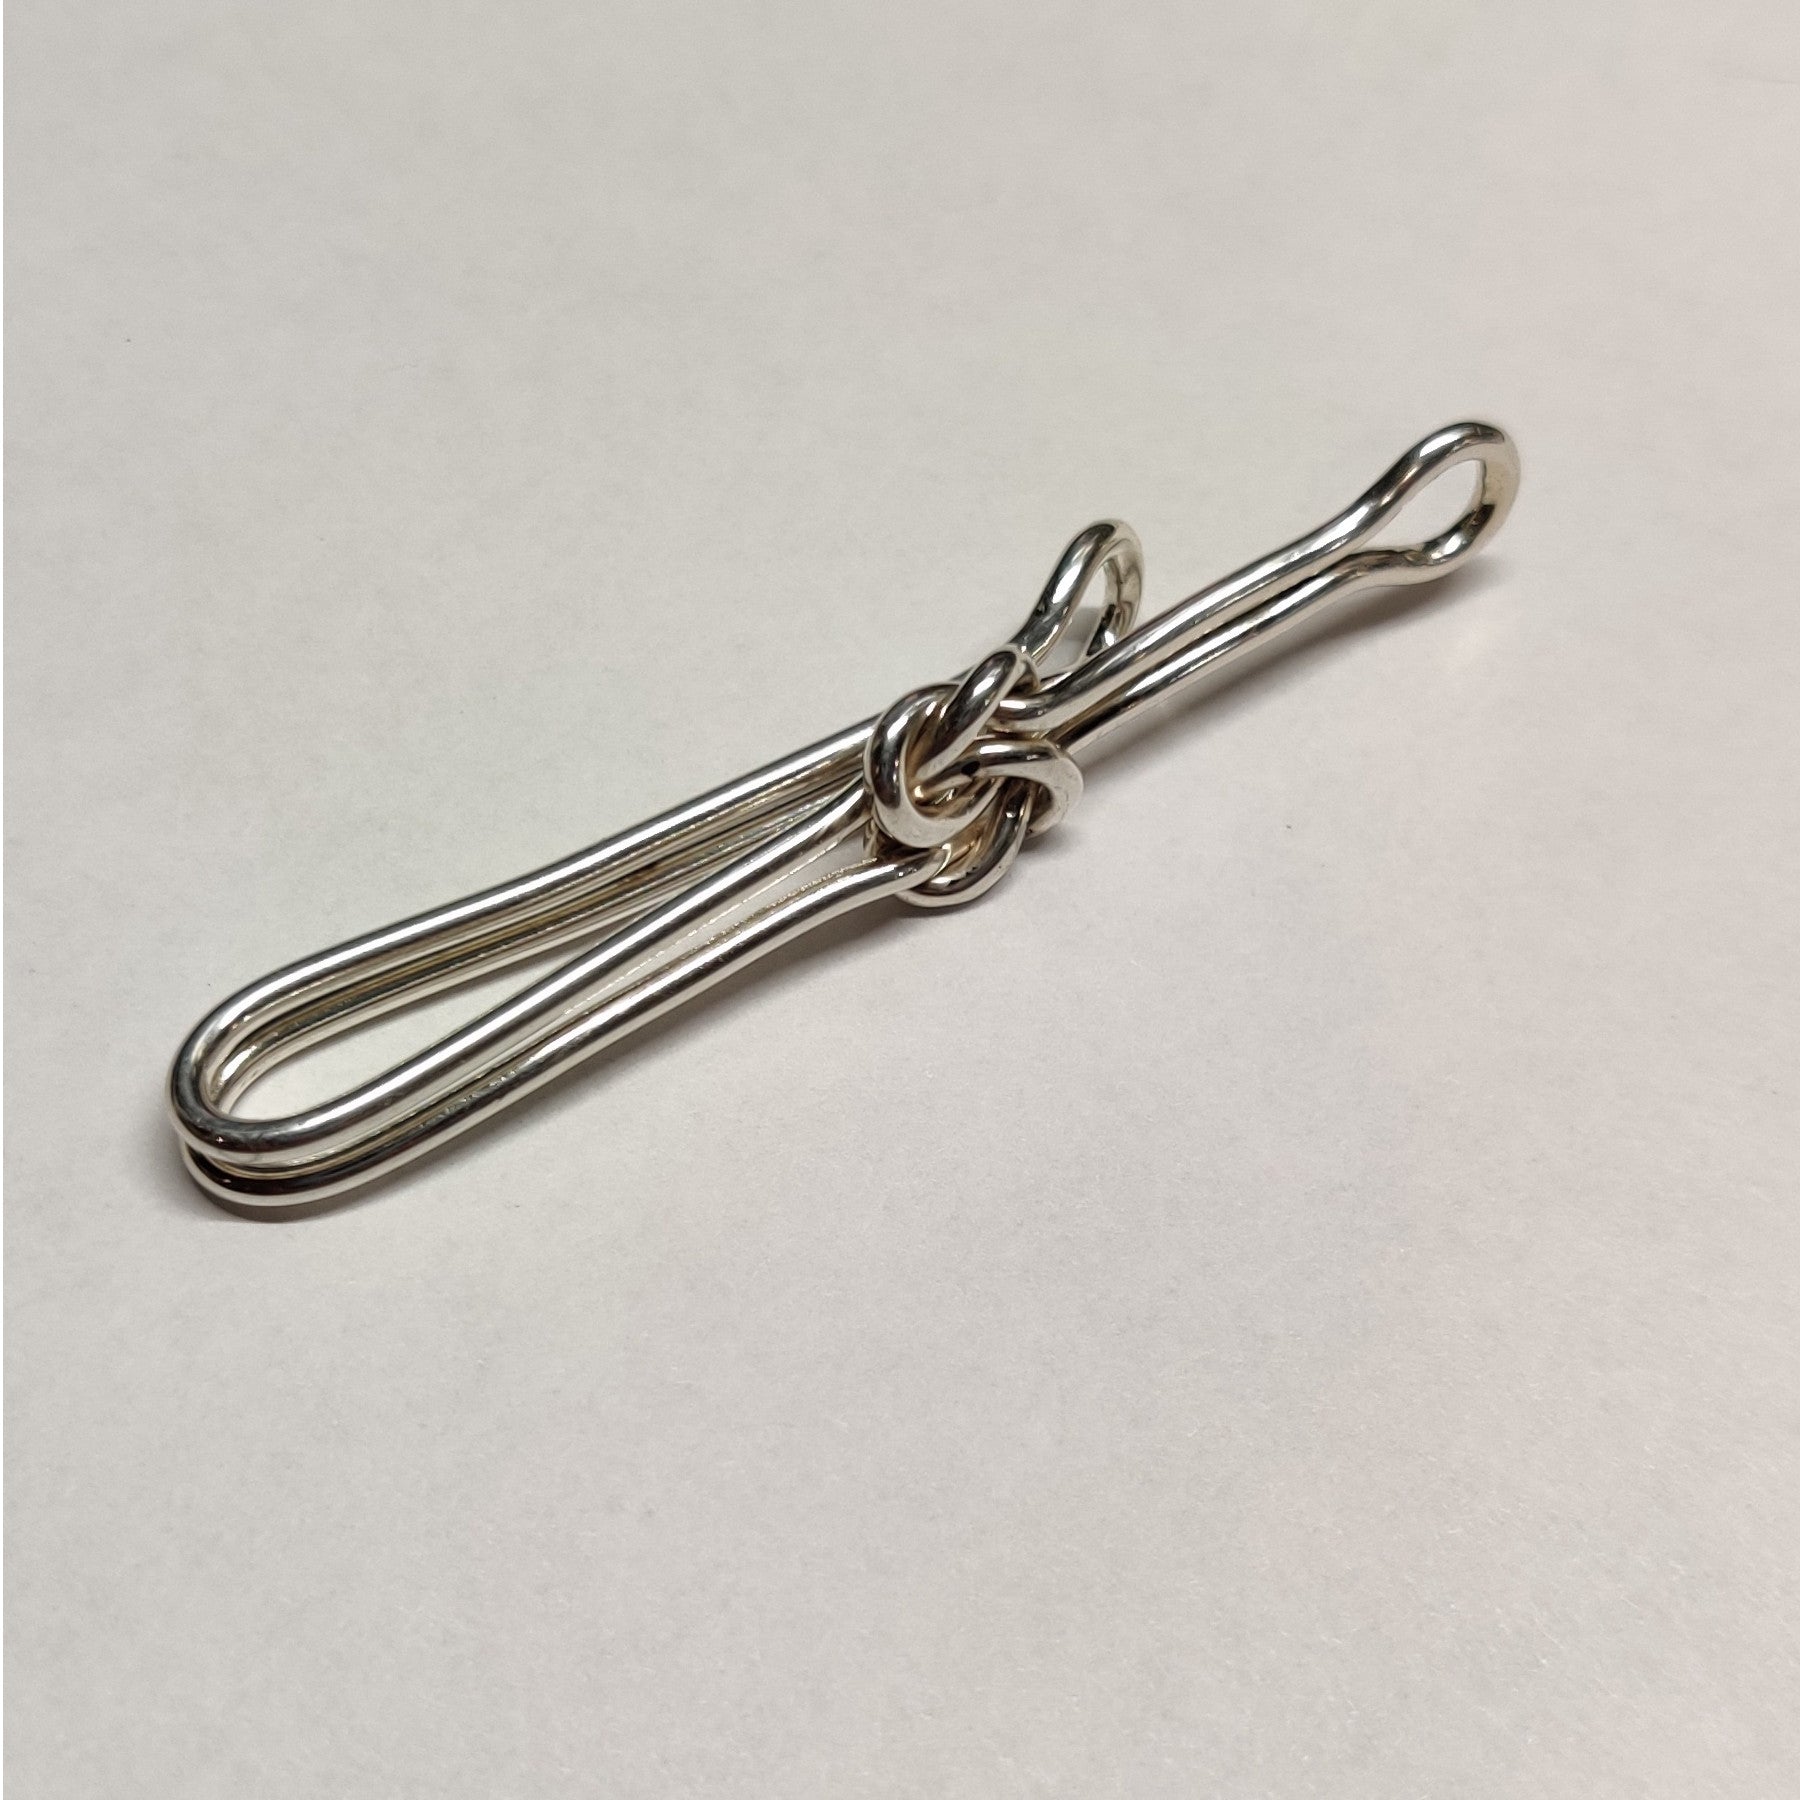 Celtic Knot Tie Clip in Sterling Silver